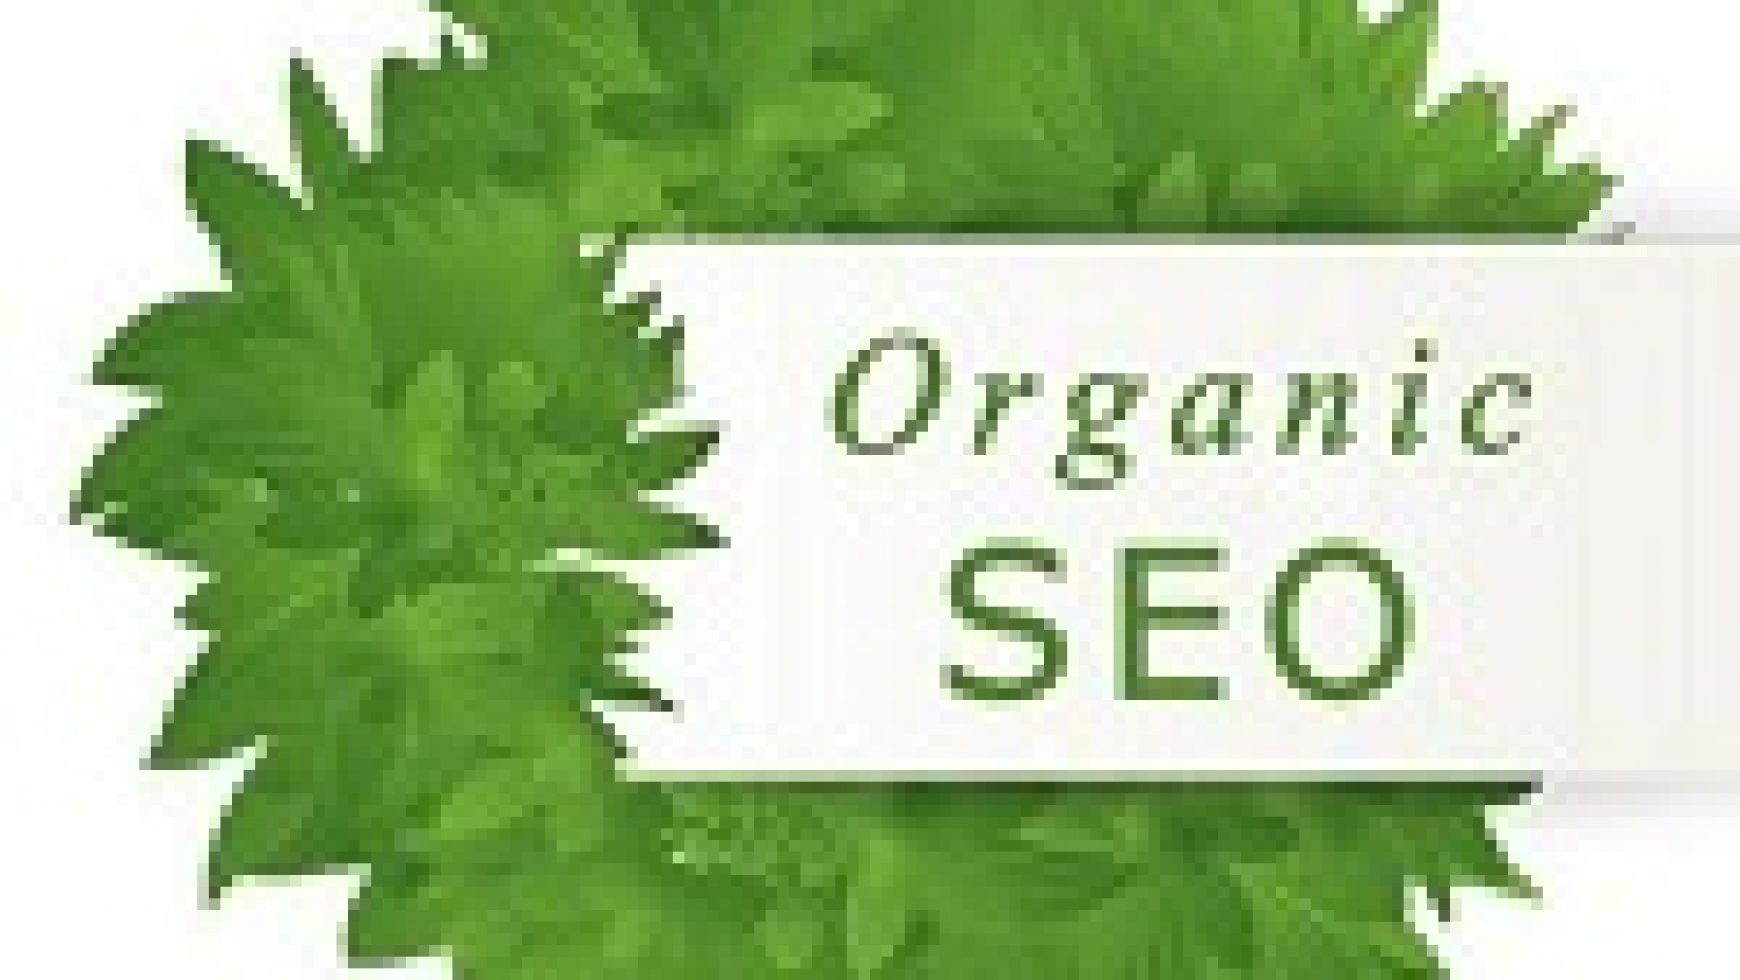 6 INDISPENSABLE TIPS FOR ORGANIC SEARCH ENGINE OPTIMIZATION (SEO)